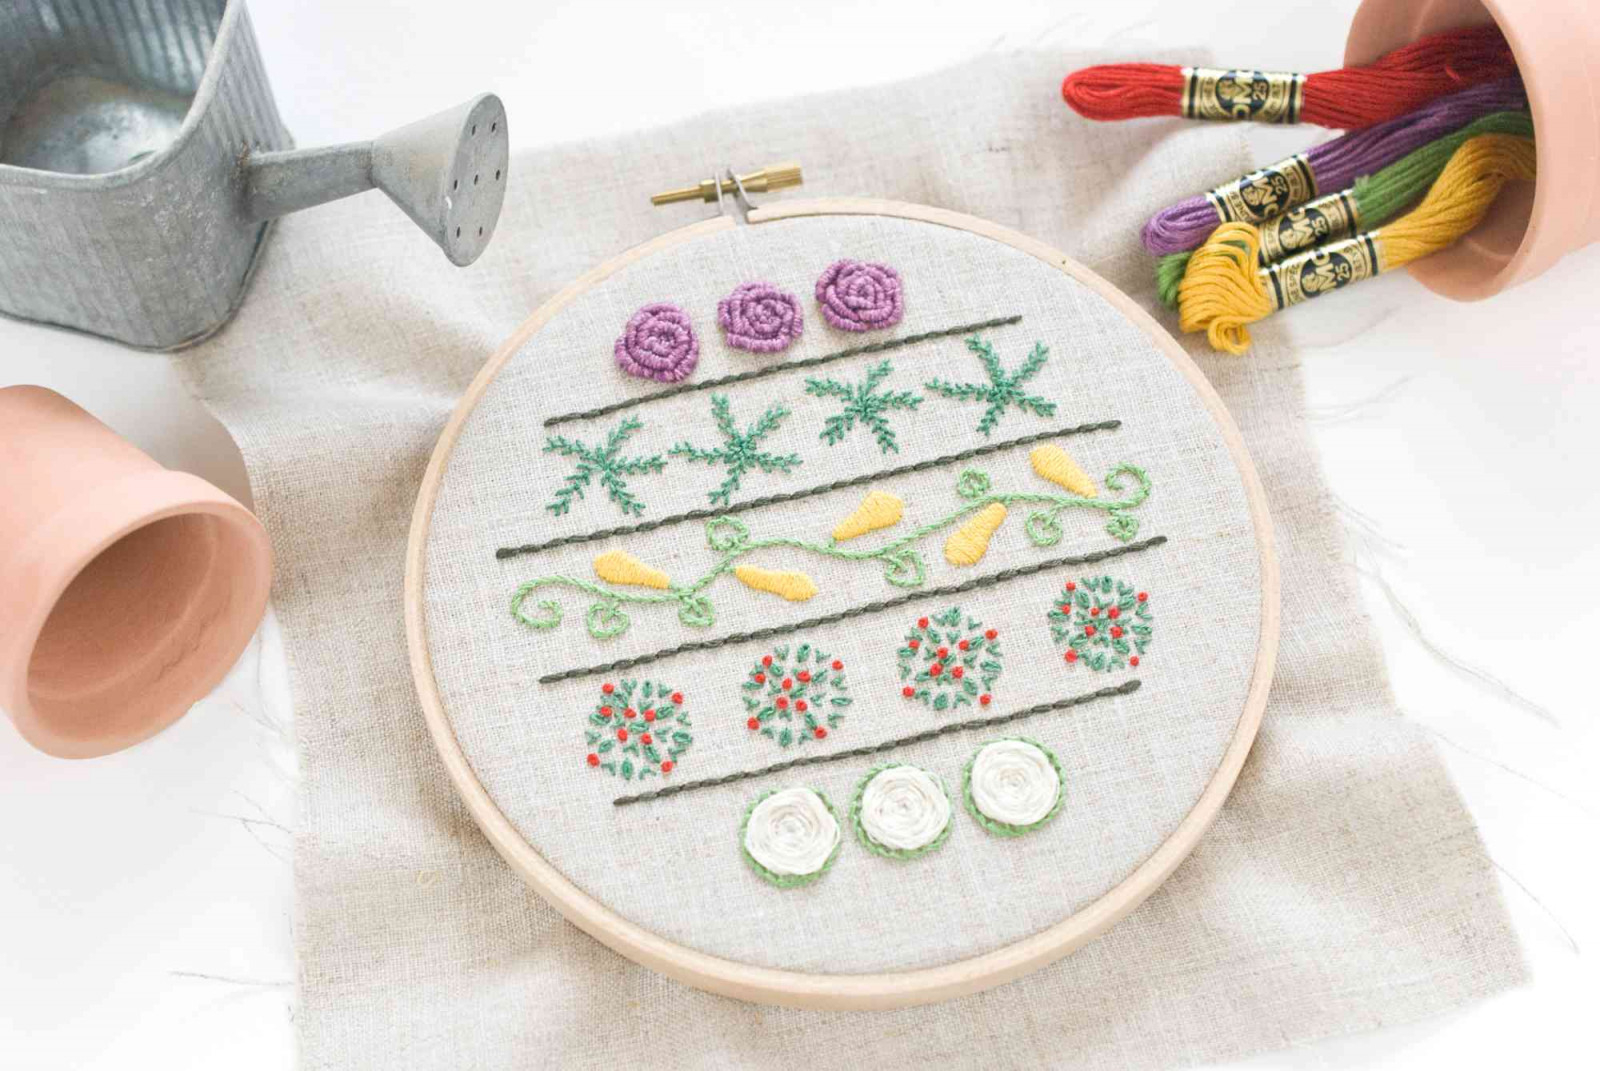 Free Embroidery Designs Patterns Hand Embroidery Designs Books Free Download Pdf Inspirational 9 Free